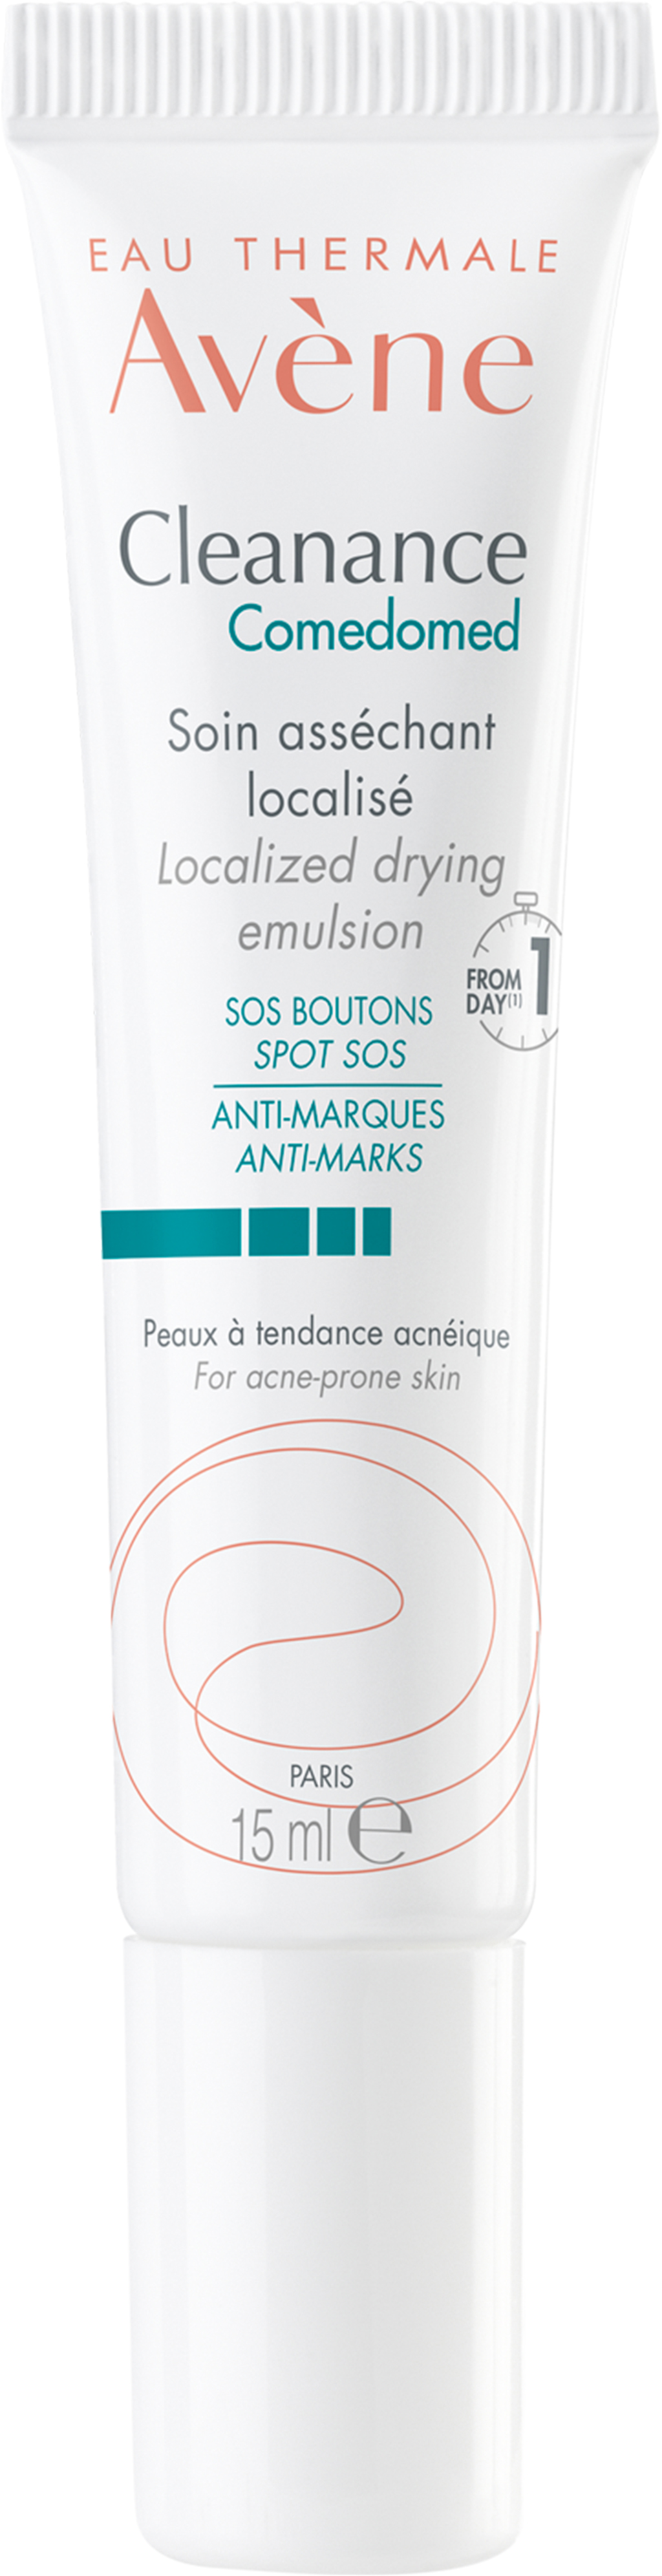 Avène Cleanance sos spot localized drying emulsion 15 ml